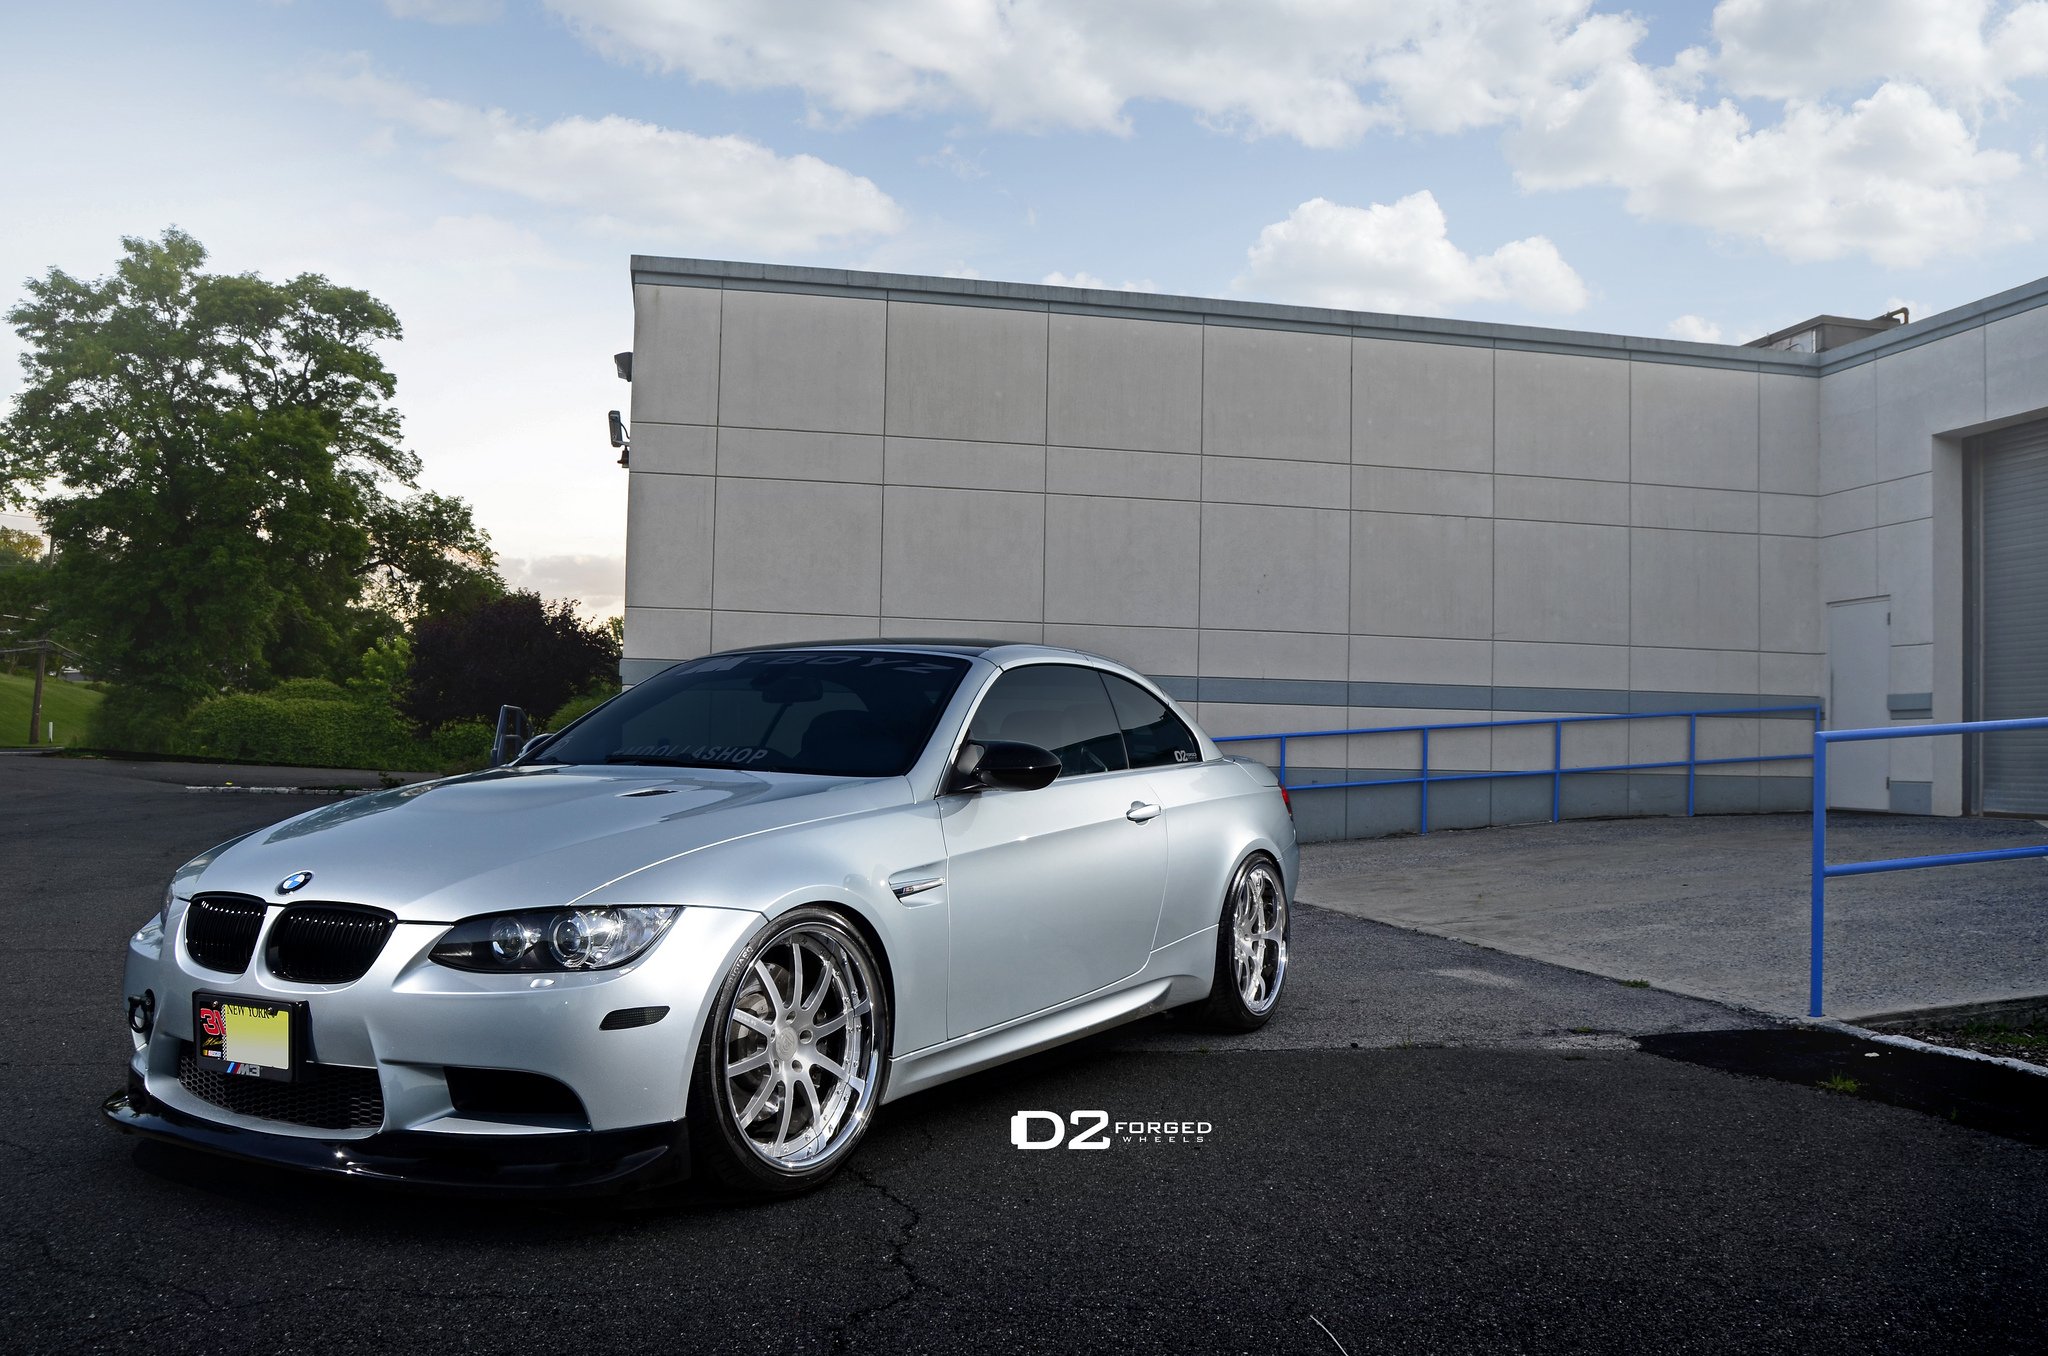 d2forged, Wheels, Tuning, Cars, Bmw, M3, E90 Wallpaper